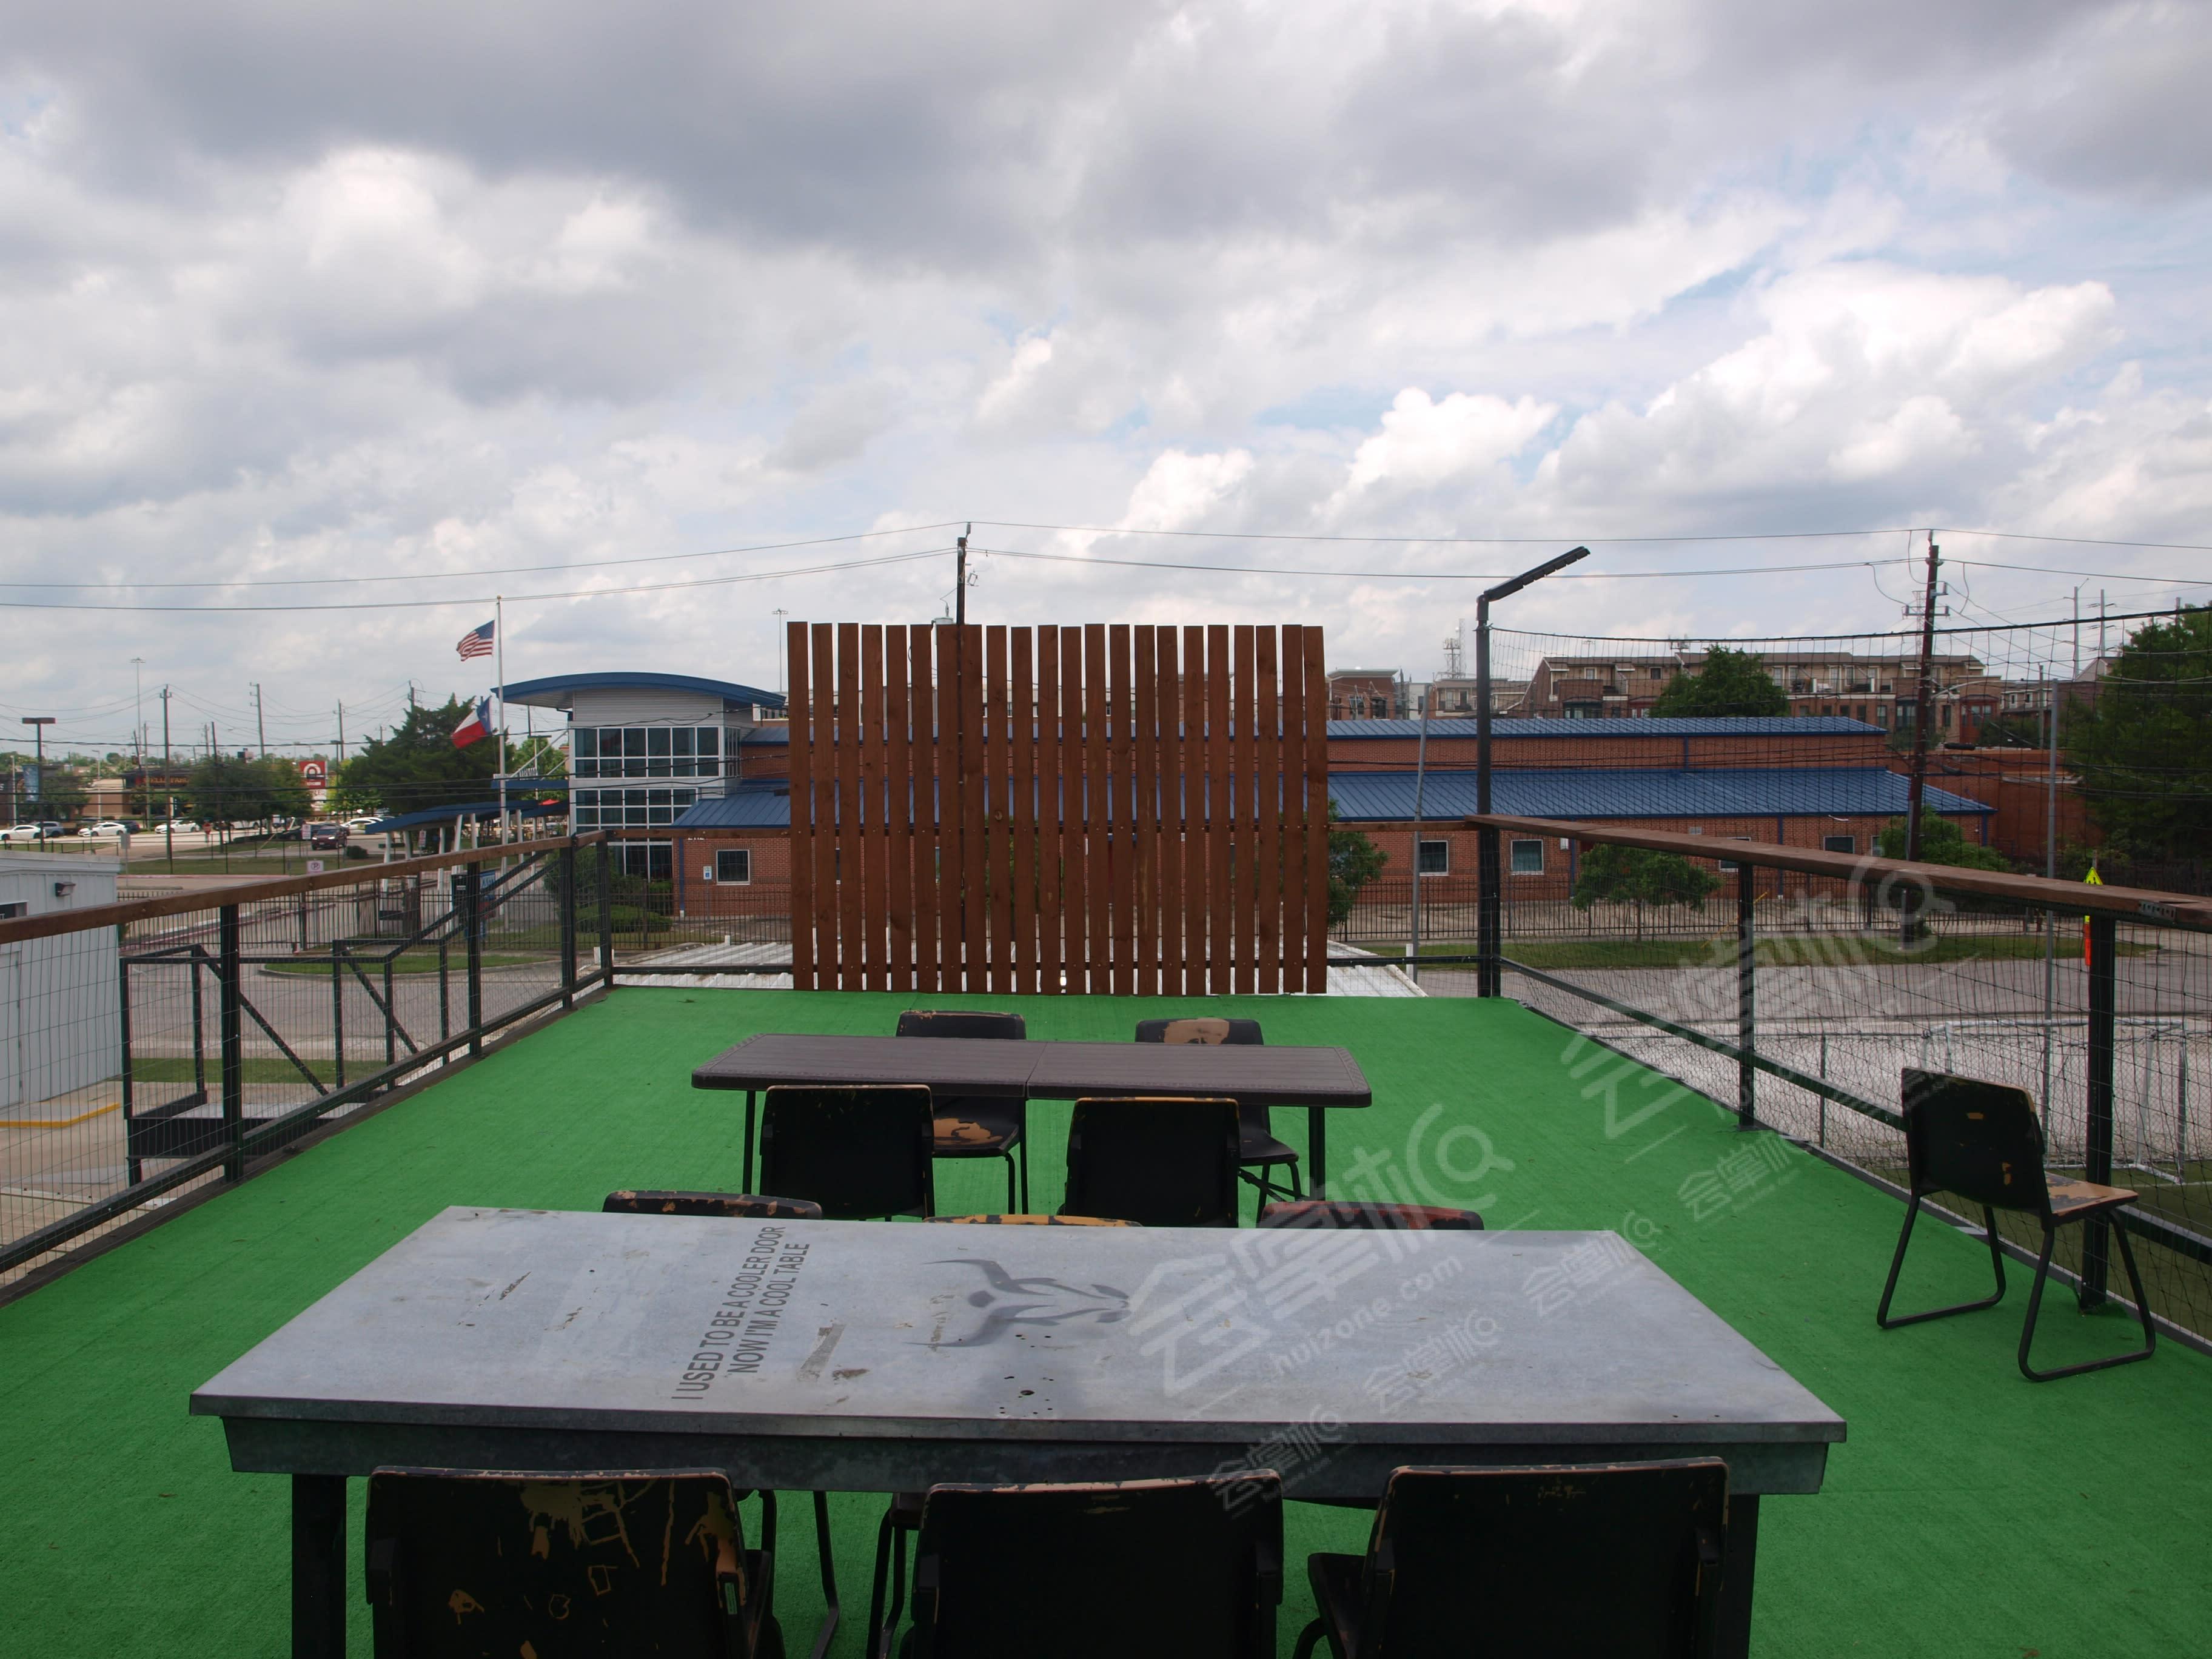 Rooftop Terrace Event Space with Skyline View